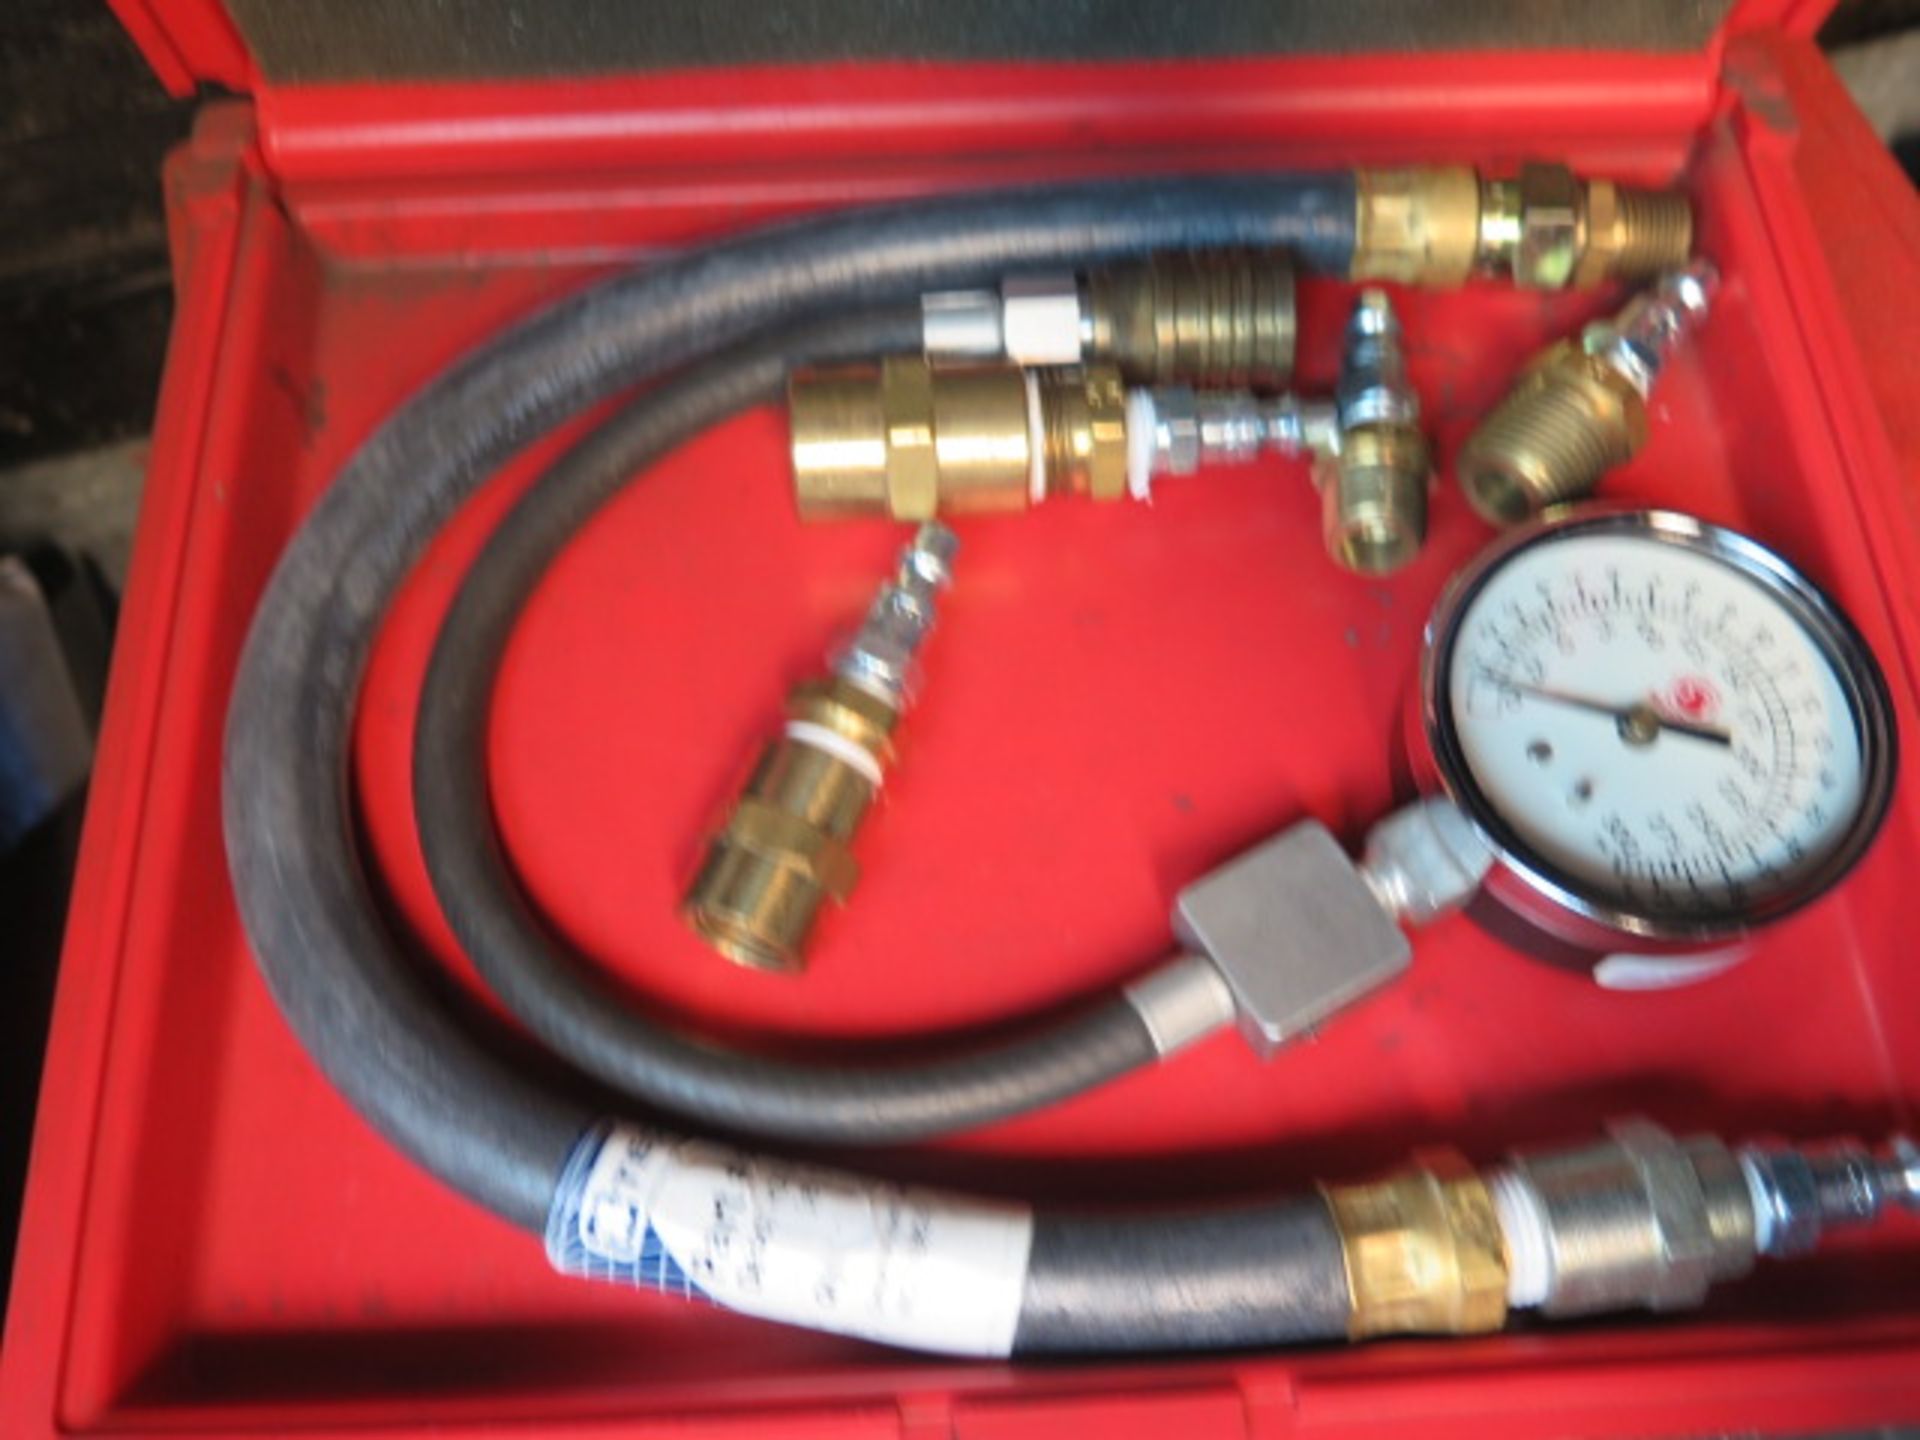 Hydraulic Brake Bleeder and Gage Sets (4) - Image 2 of 4